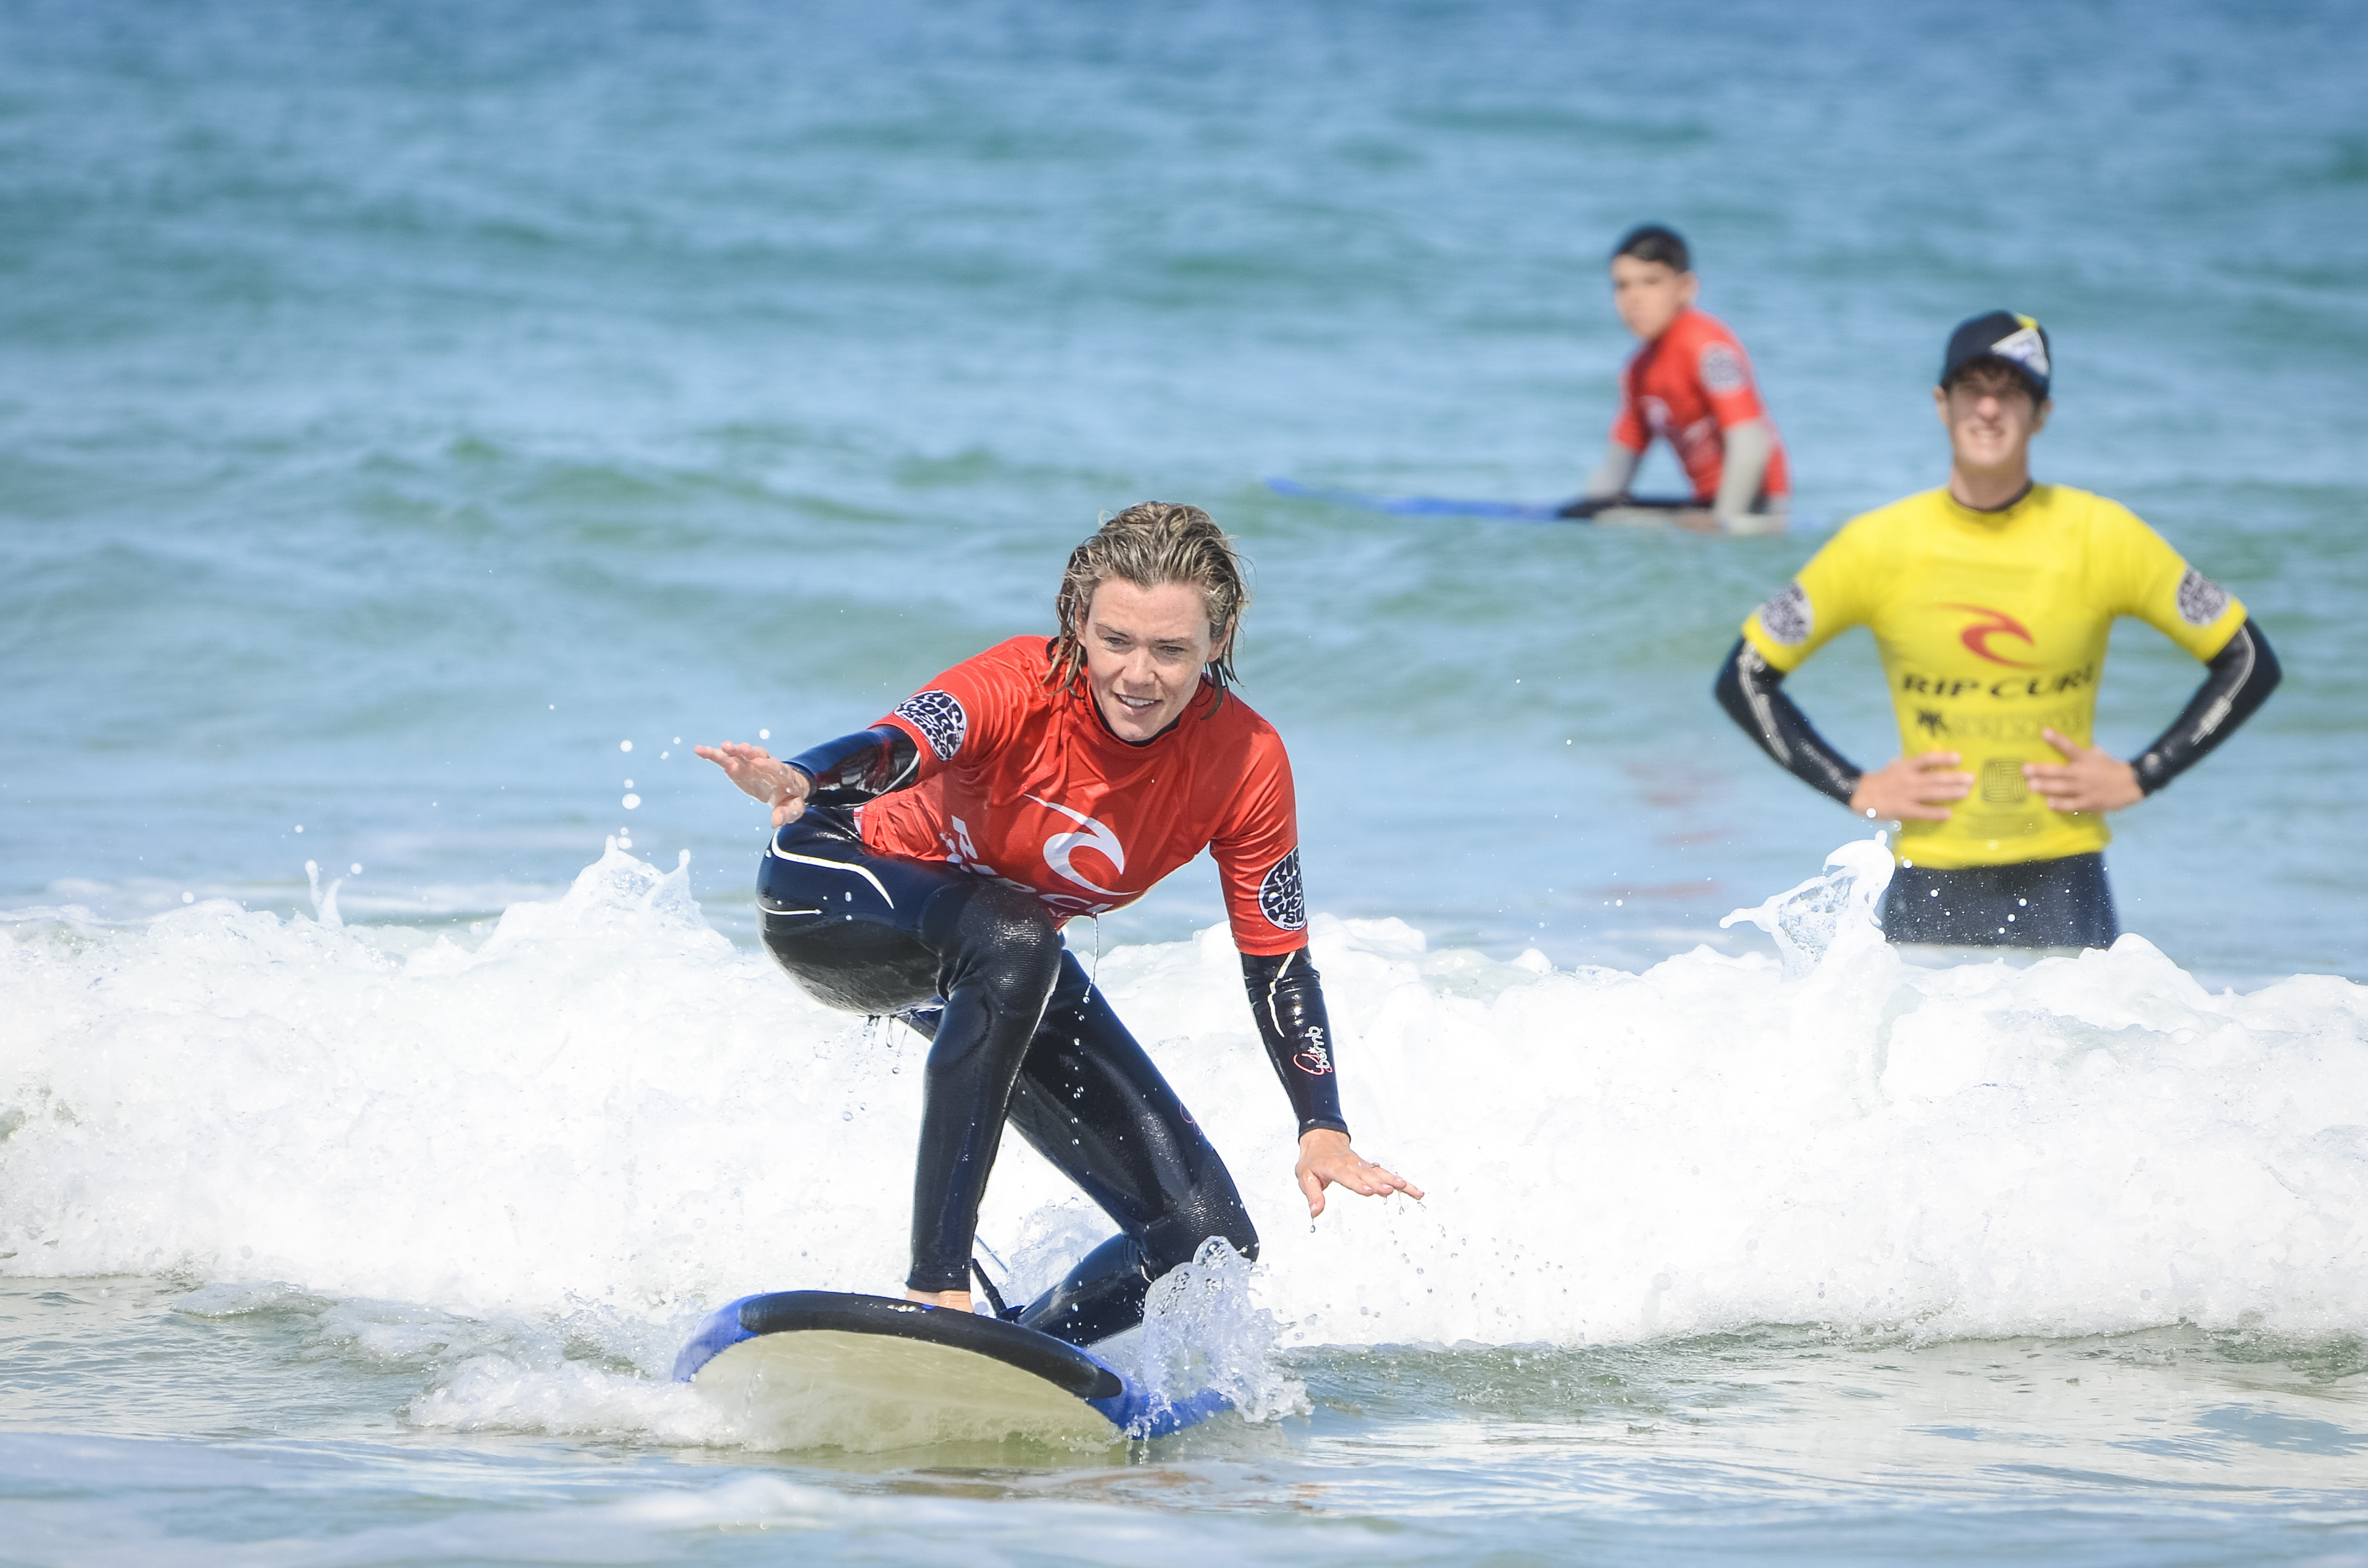 Newquay surfing lesson
